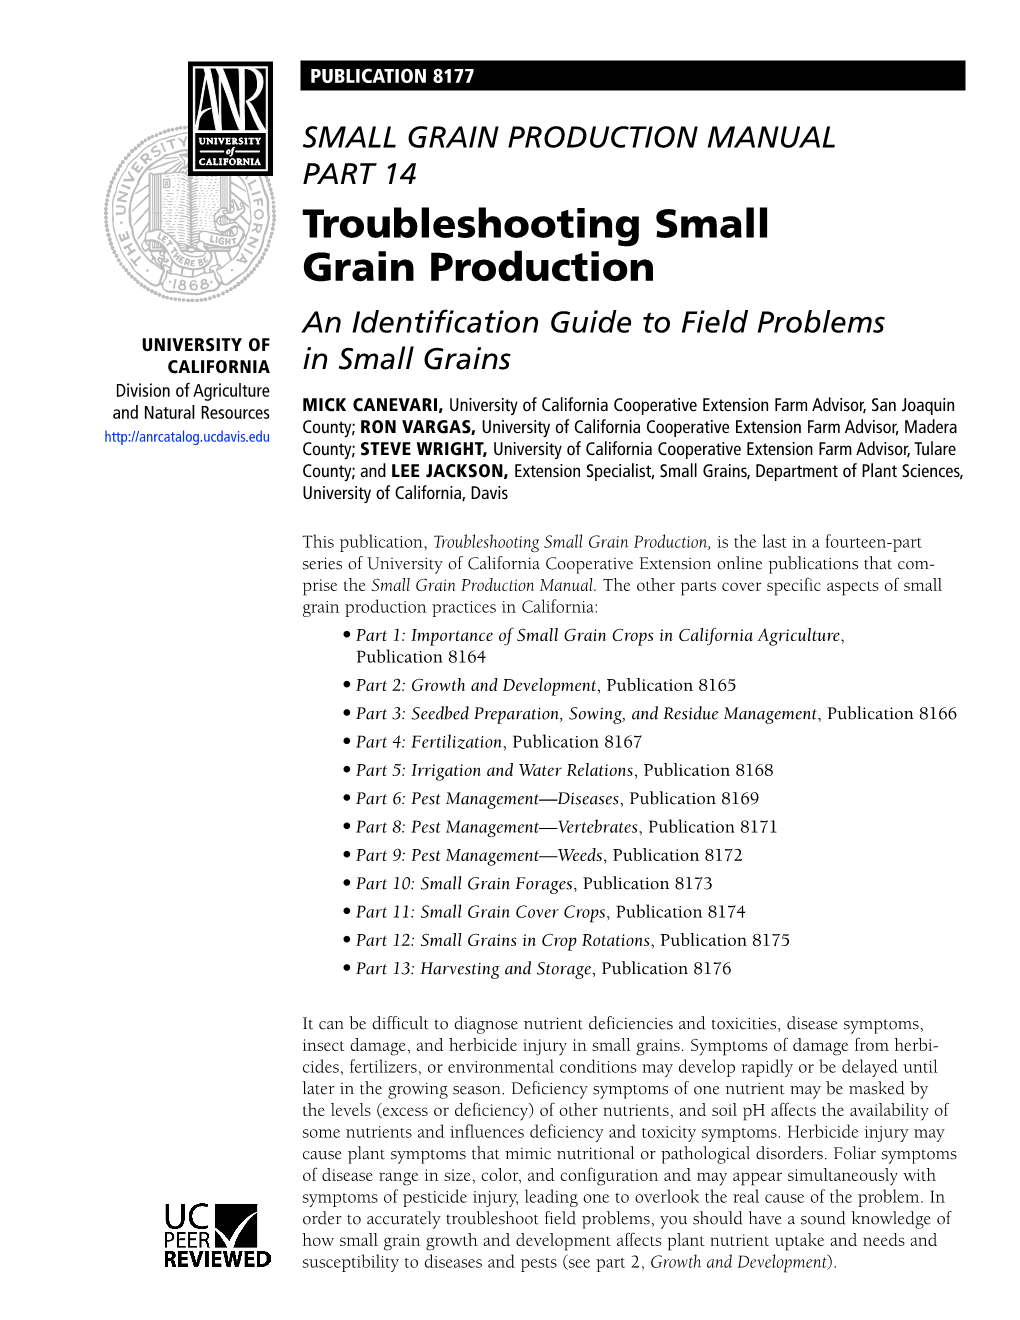 Troubleshooting Small Grain Production